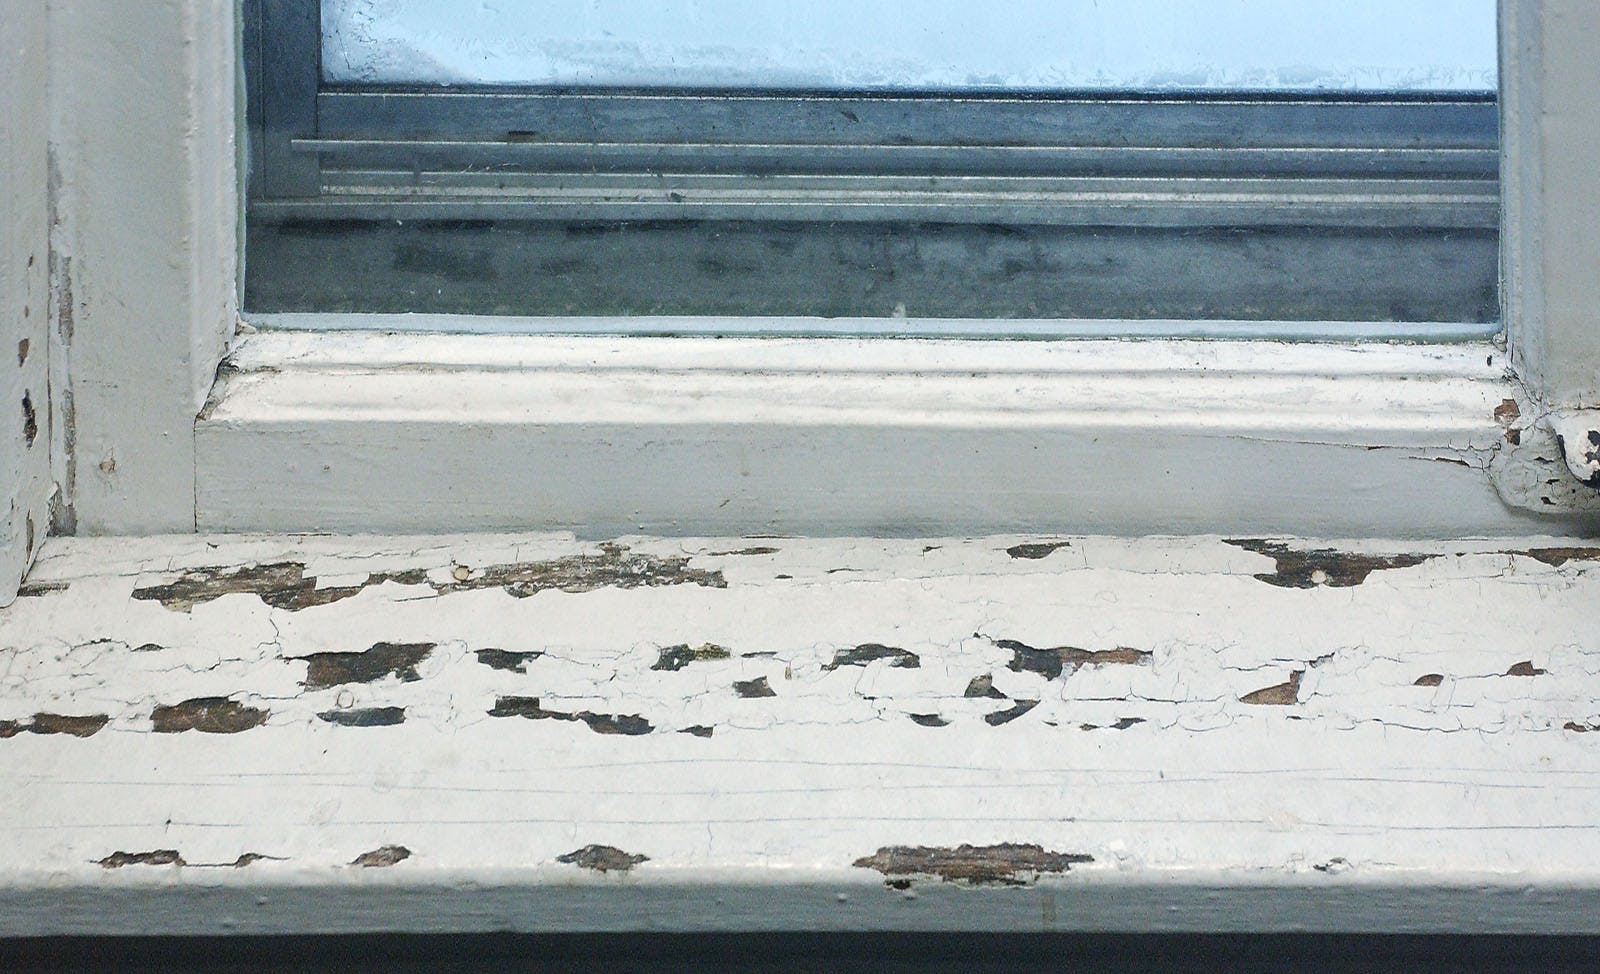 Lead paint on an old window frame.